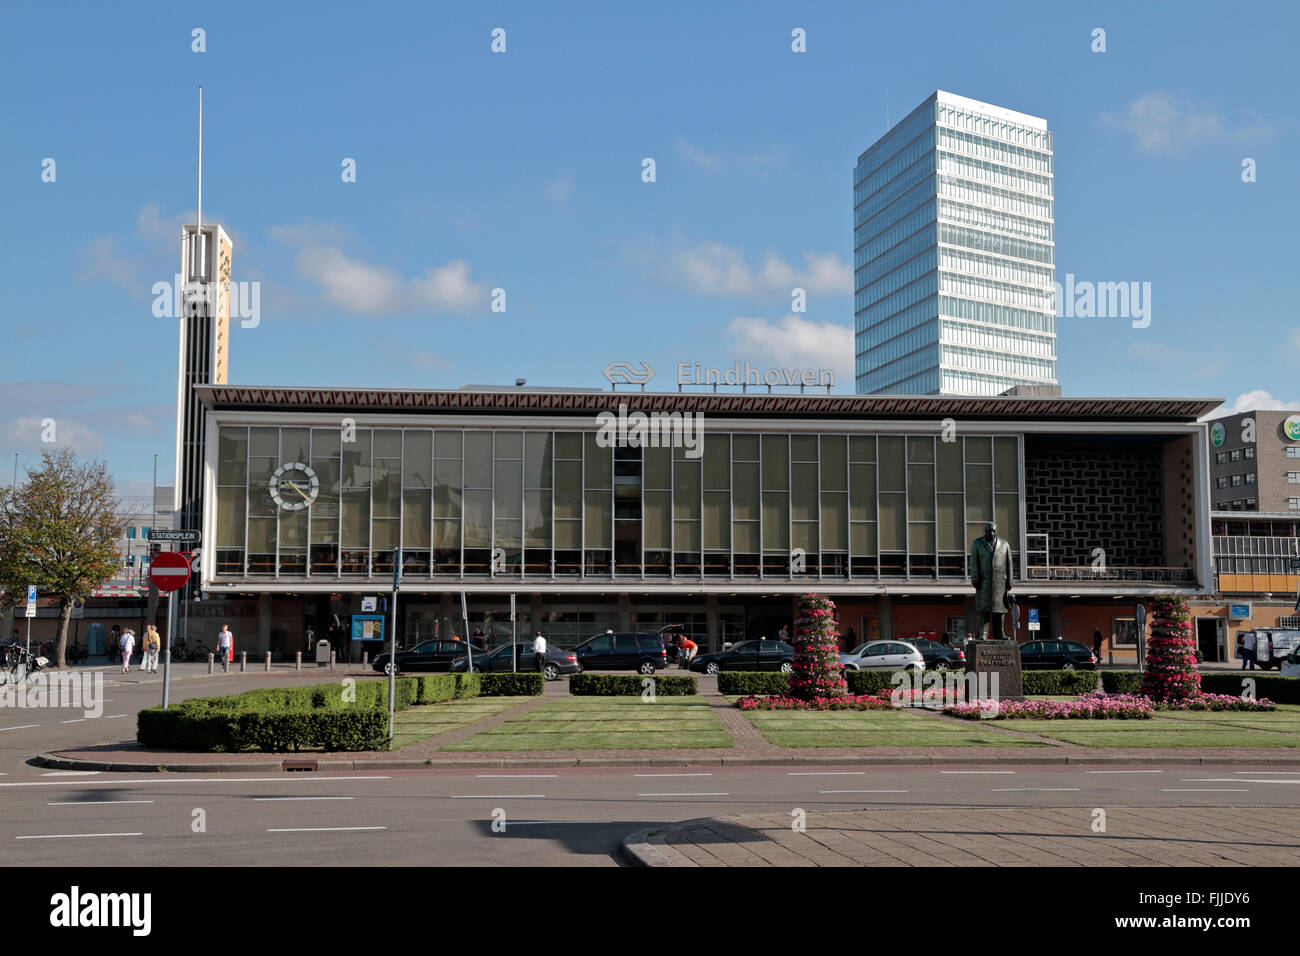 The main railway station in Eindhoven, Noord-Brabant, Netherlands. Stock Photo